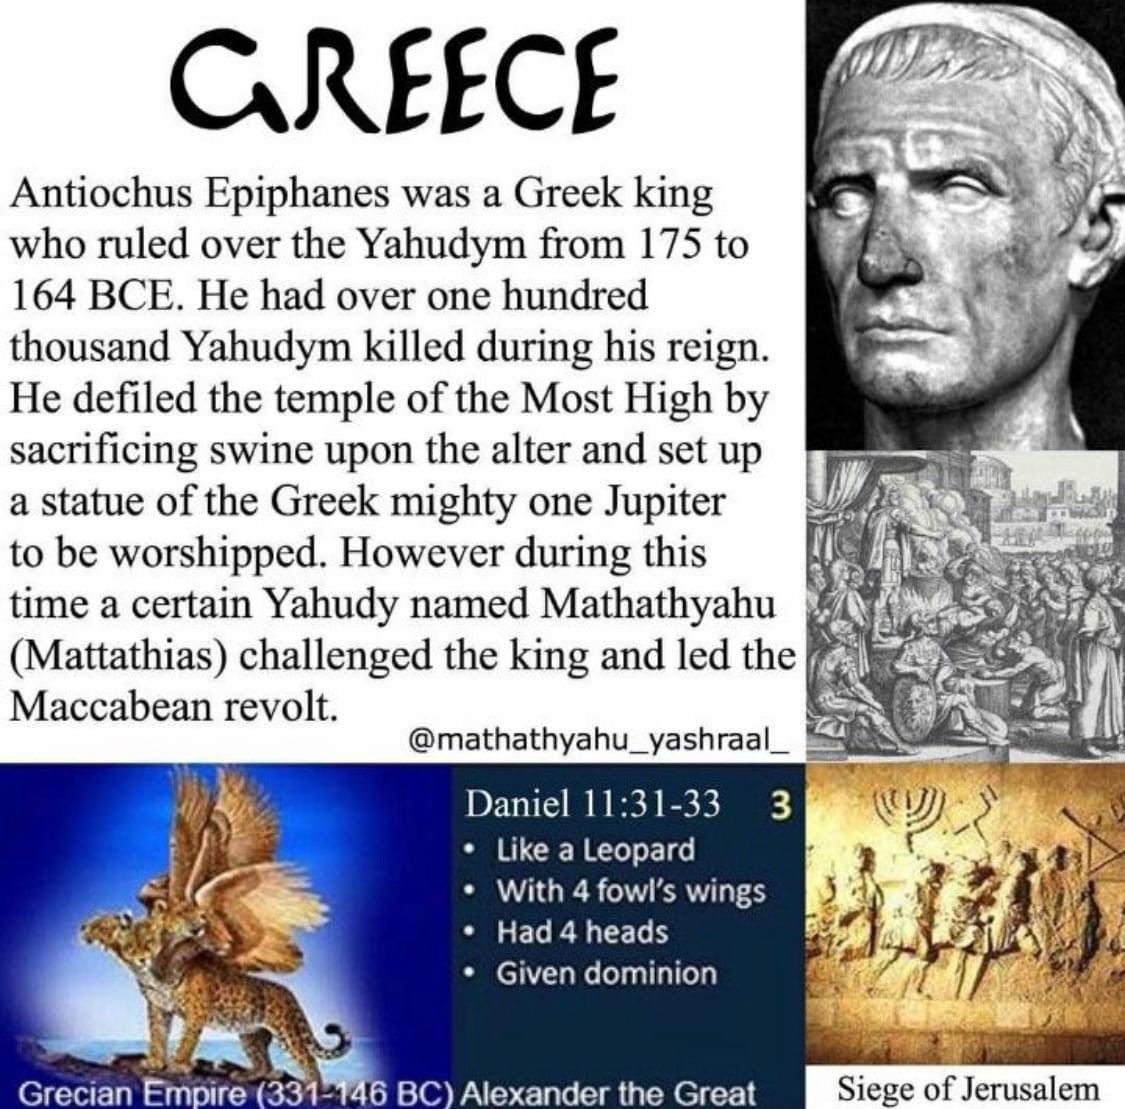 False claim: Hebrews (Yahudym) were Greeks. 

Truth: Greeks were the pagan enemy of the Hebrews (Yahudym).

The Apocrypha (Book of Maccabees) covers this history.